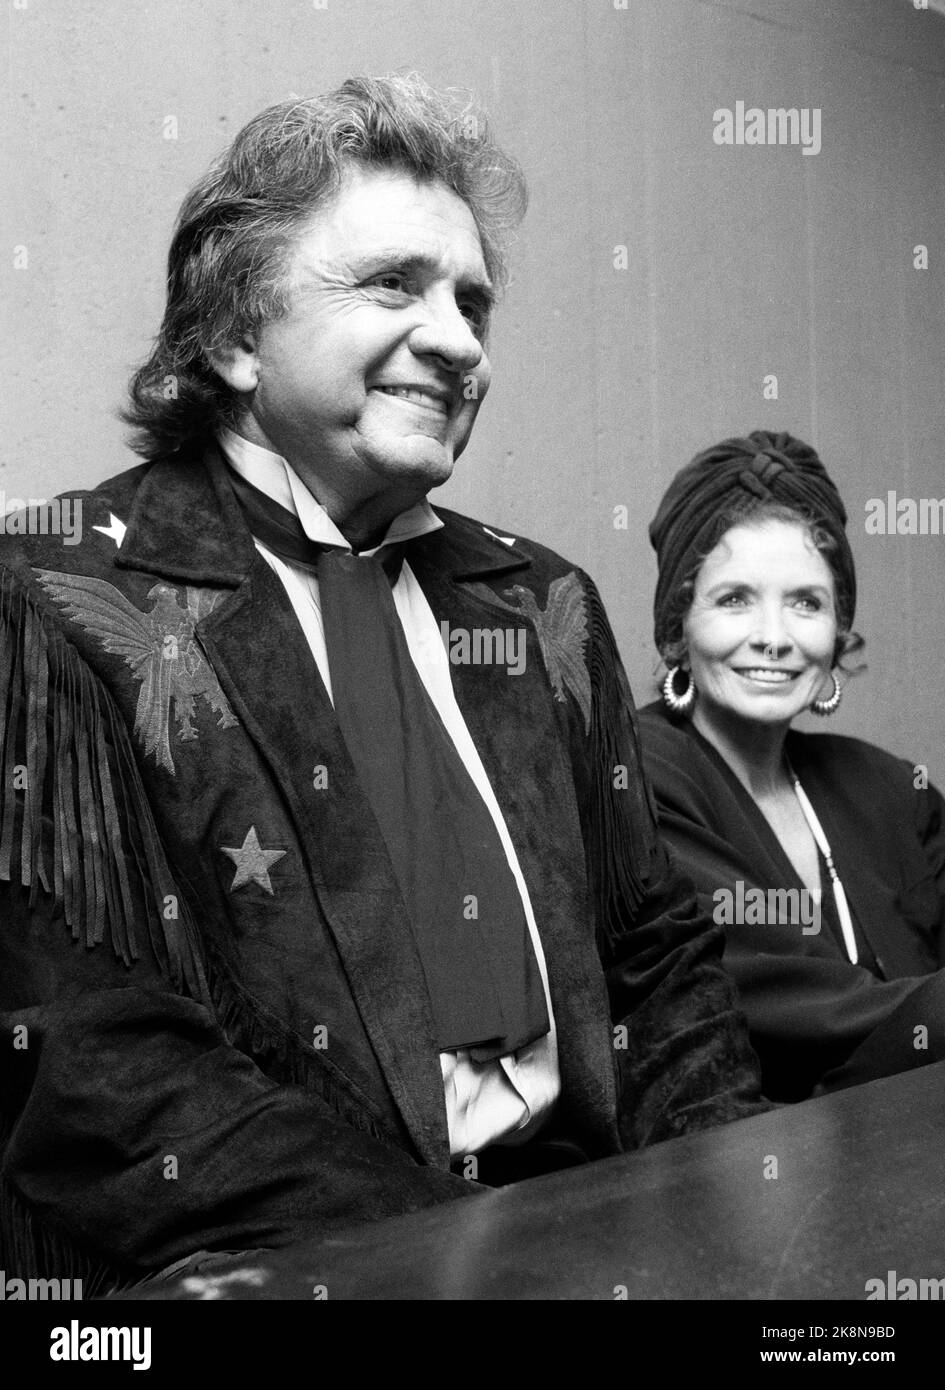 Oslo 1987-08-26: Johhny Cash in Norway on the occasion of his concert in Ekeberghallen on August 26, 1987. In the picture Johhny Cash with his wife, June Carter. Photo: Bjørn Sigurdsøn Stock Photo